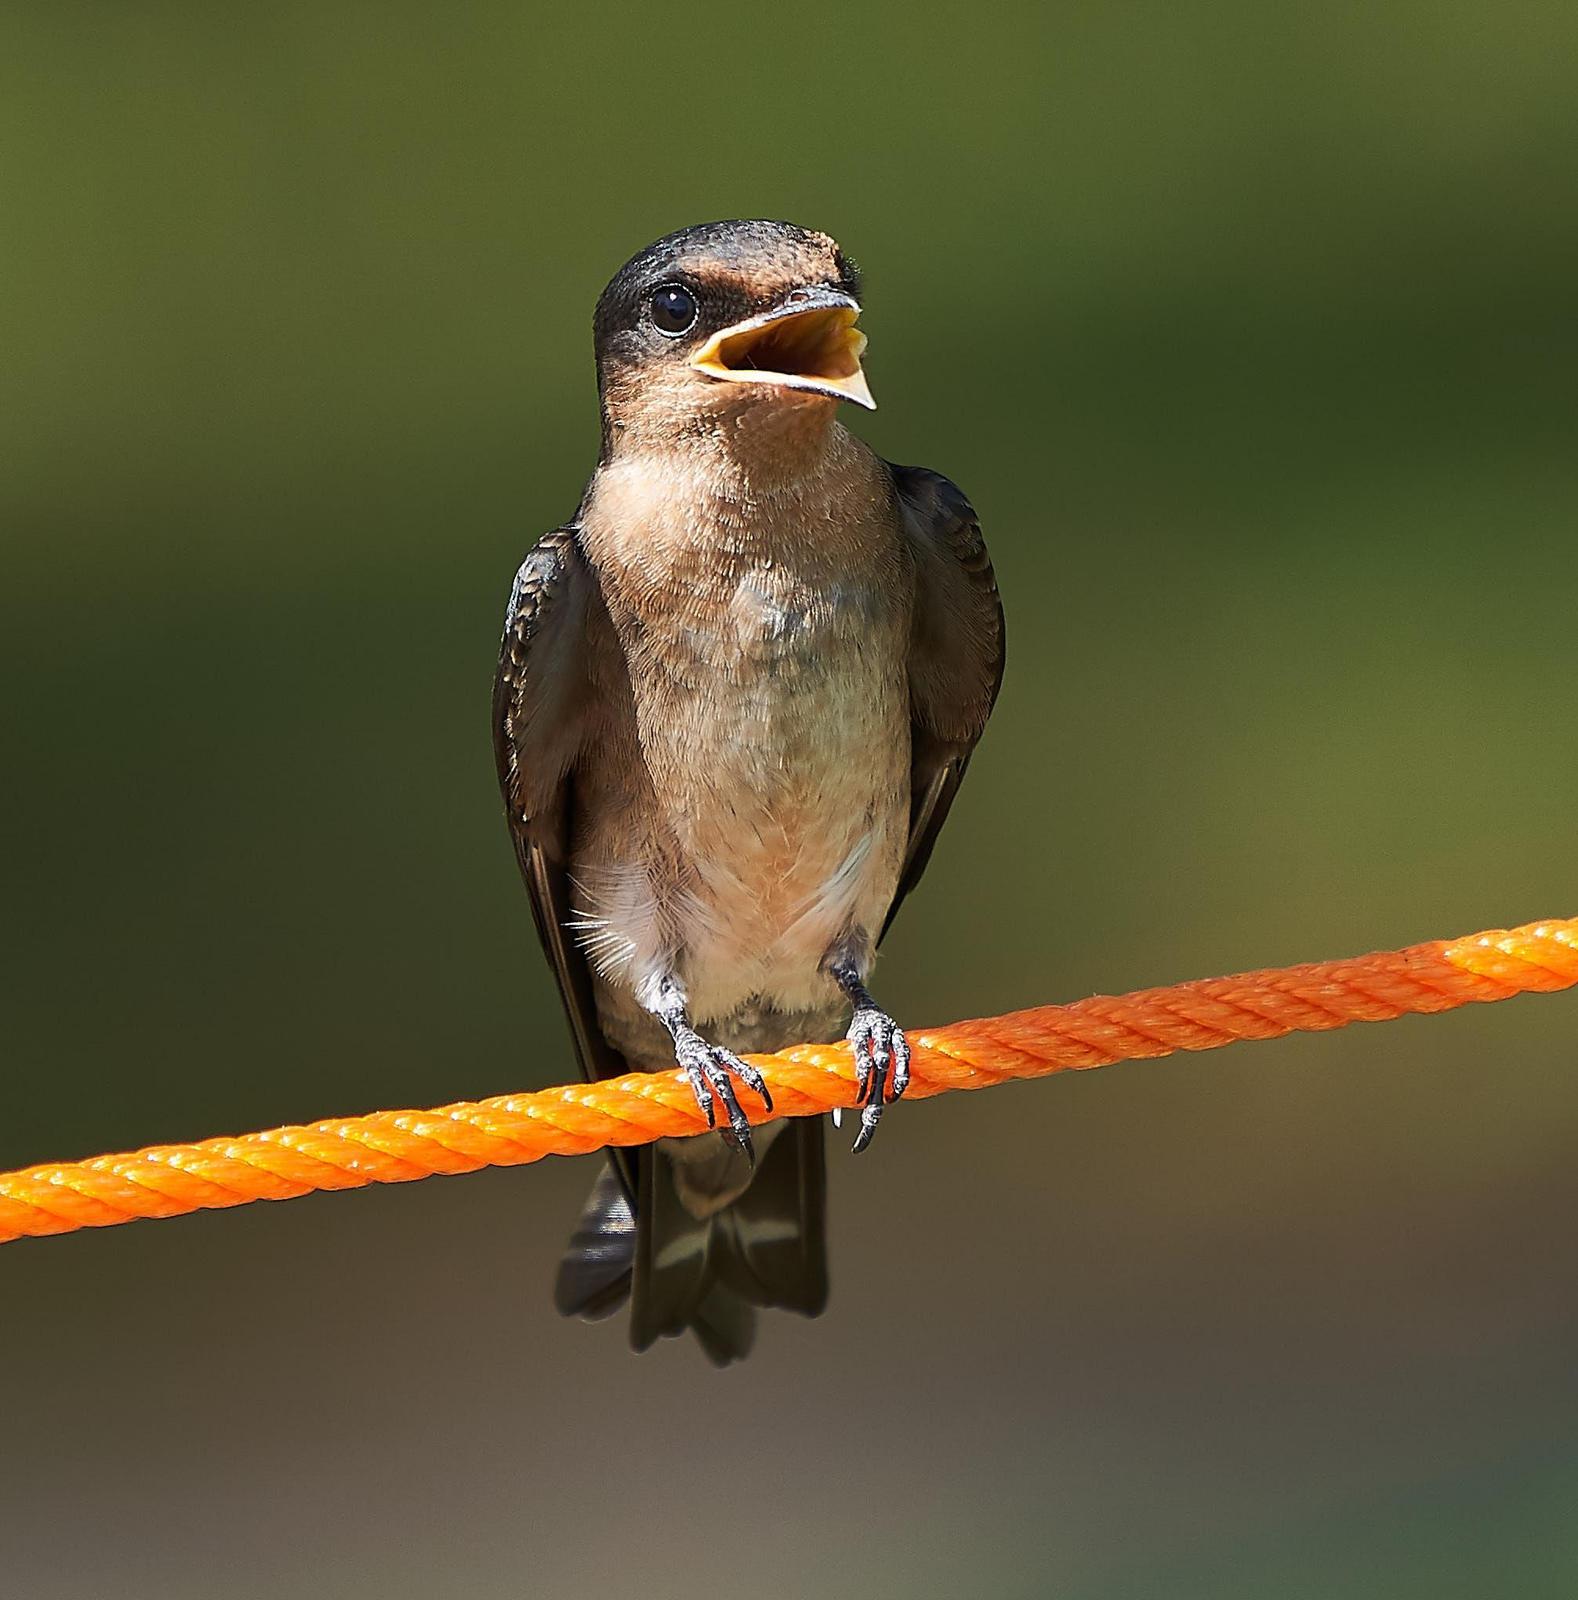 Pacific Swallow Photo by Steven Cheong